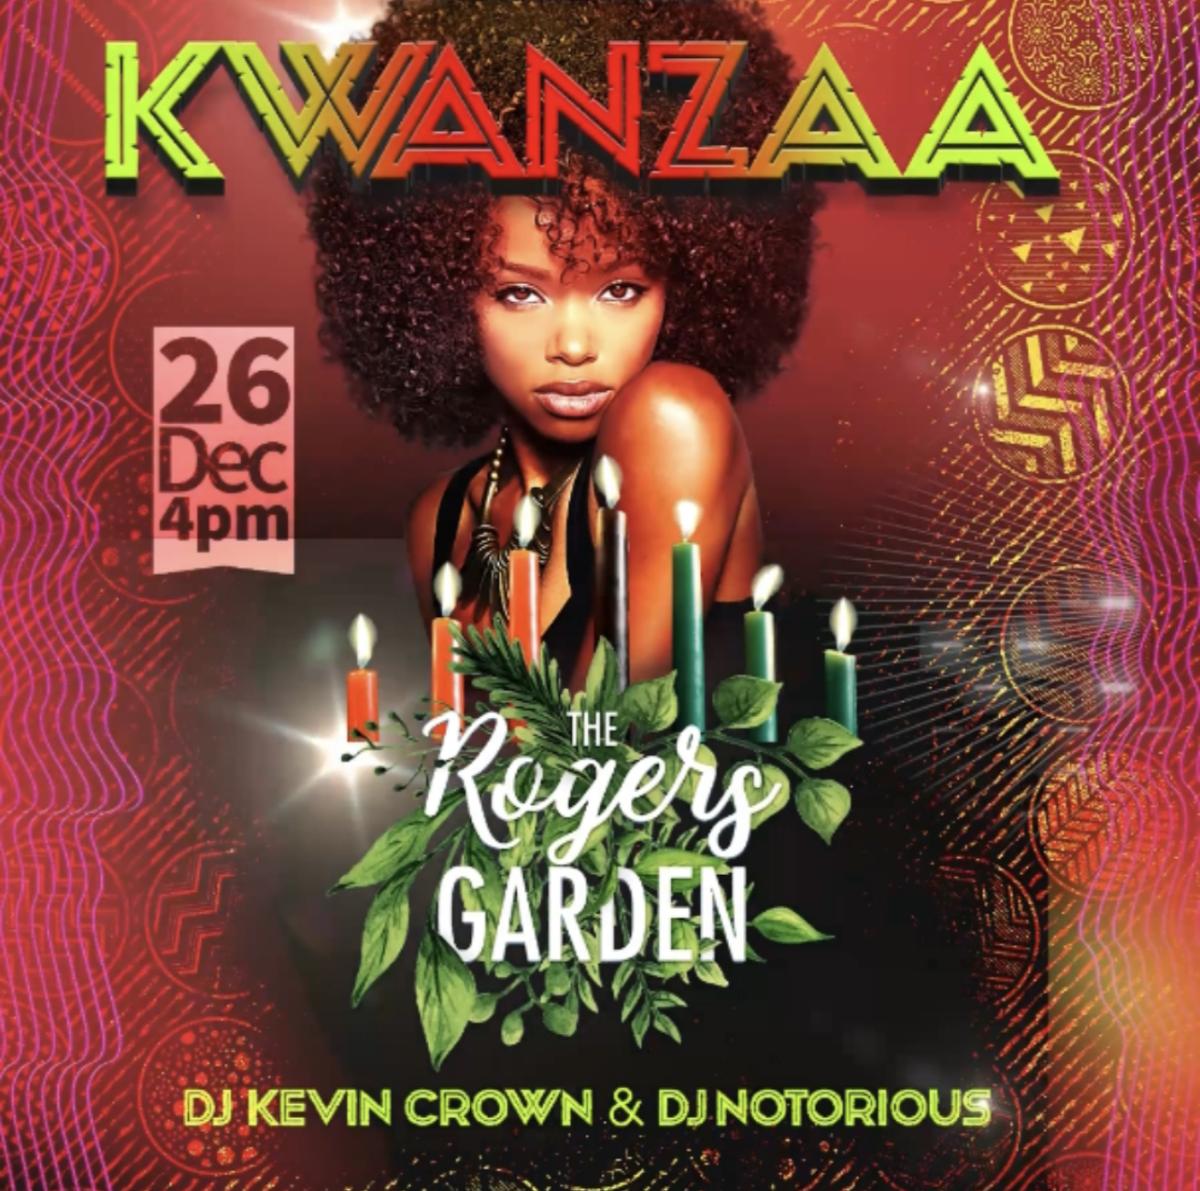 Kwanzaa at Roger’s Garden flyer or graphic.